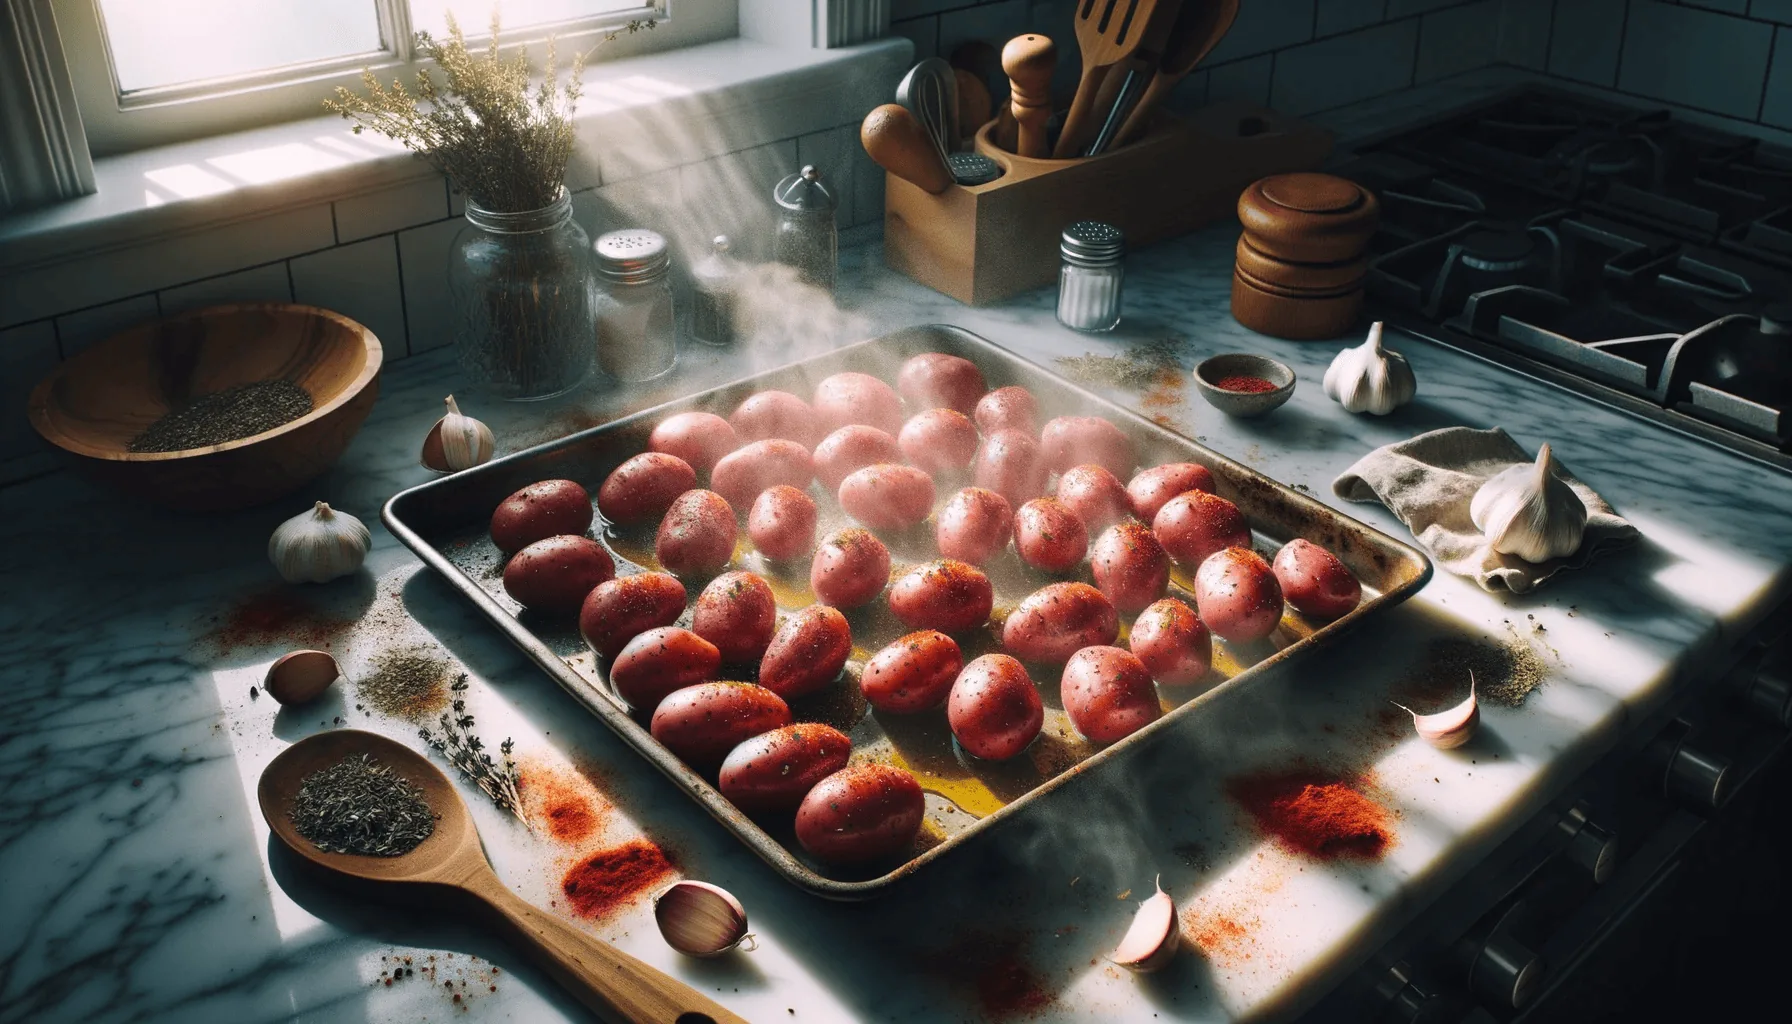 The making of roasted red potatoes